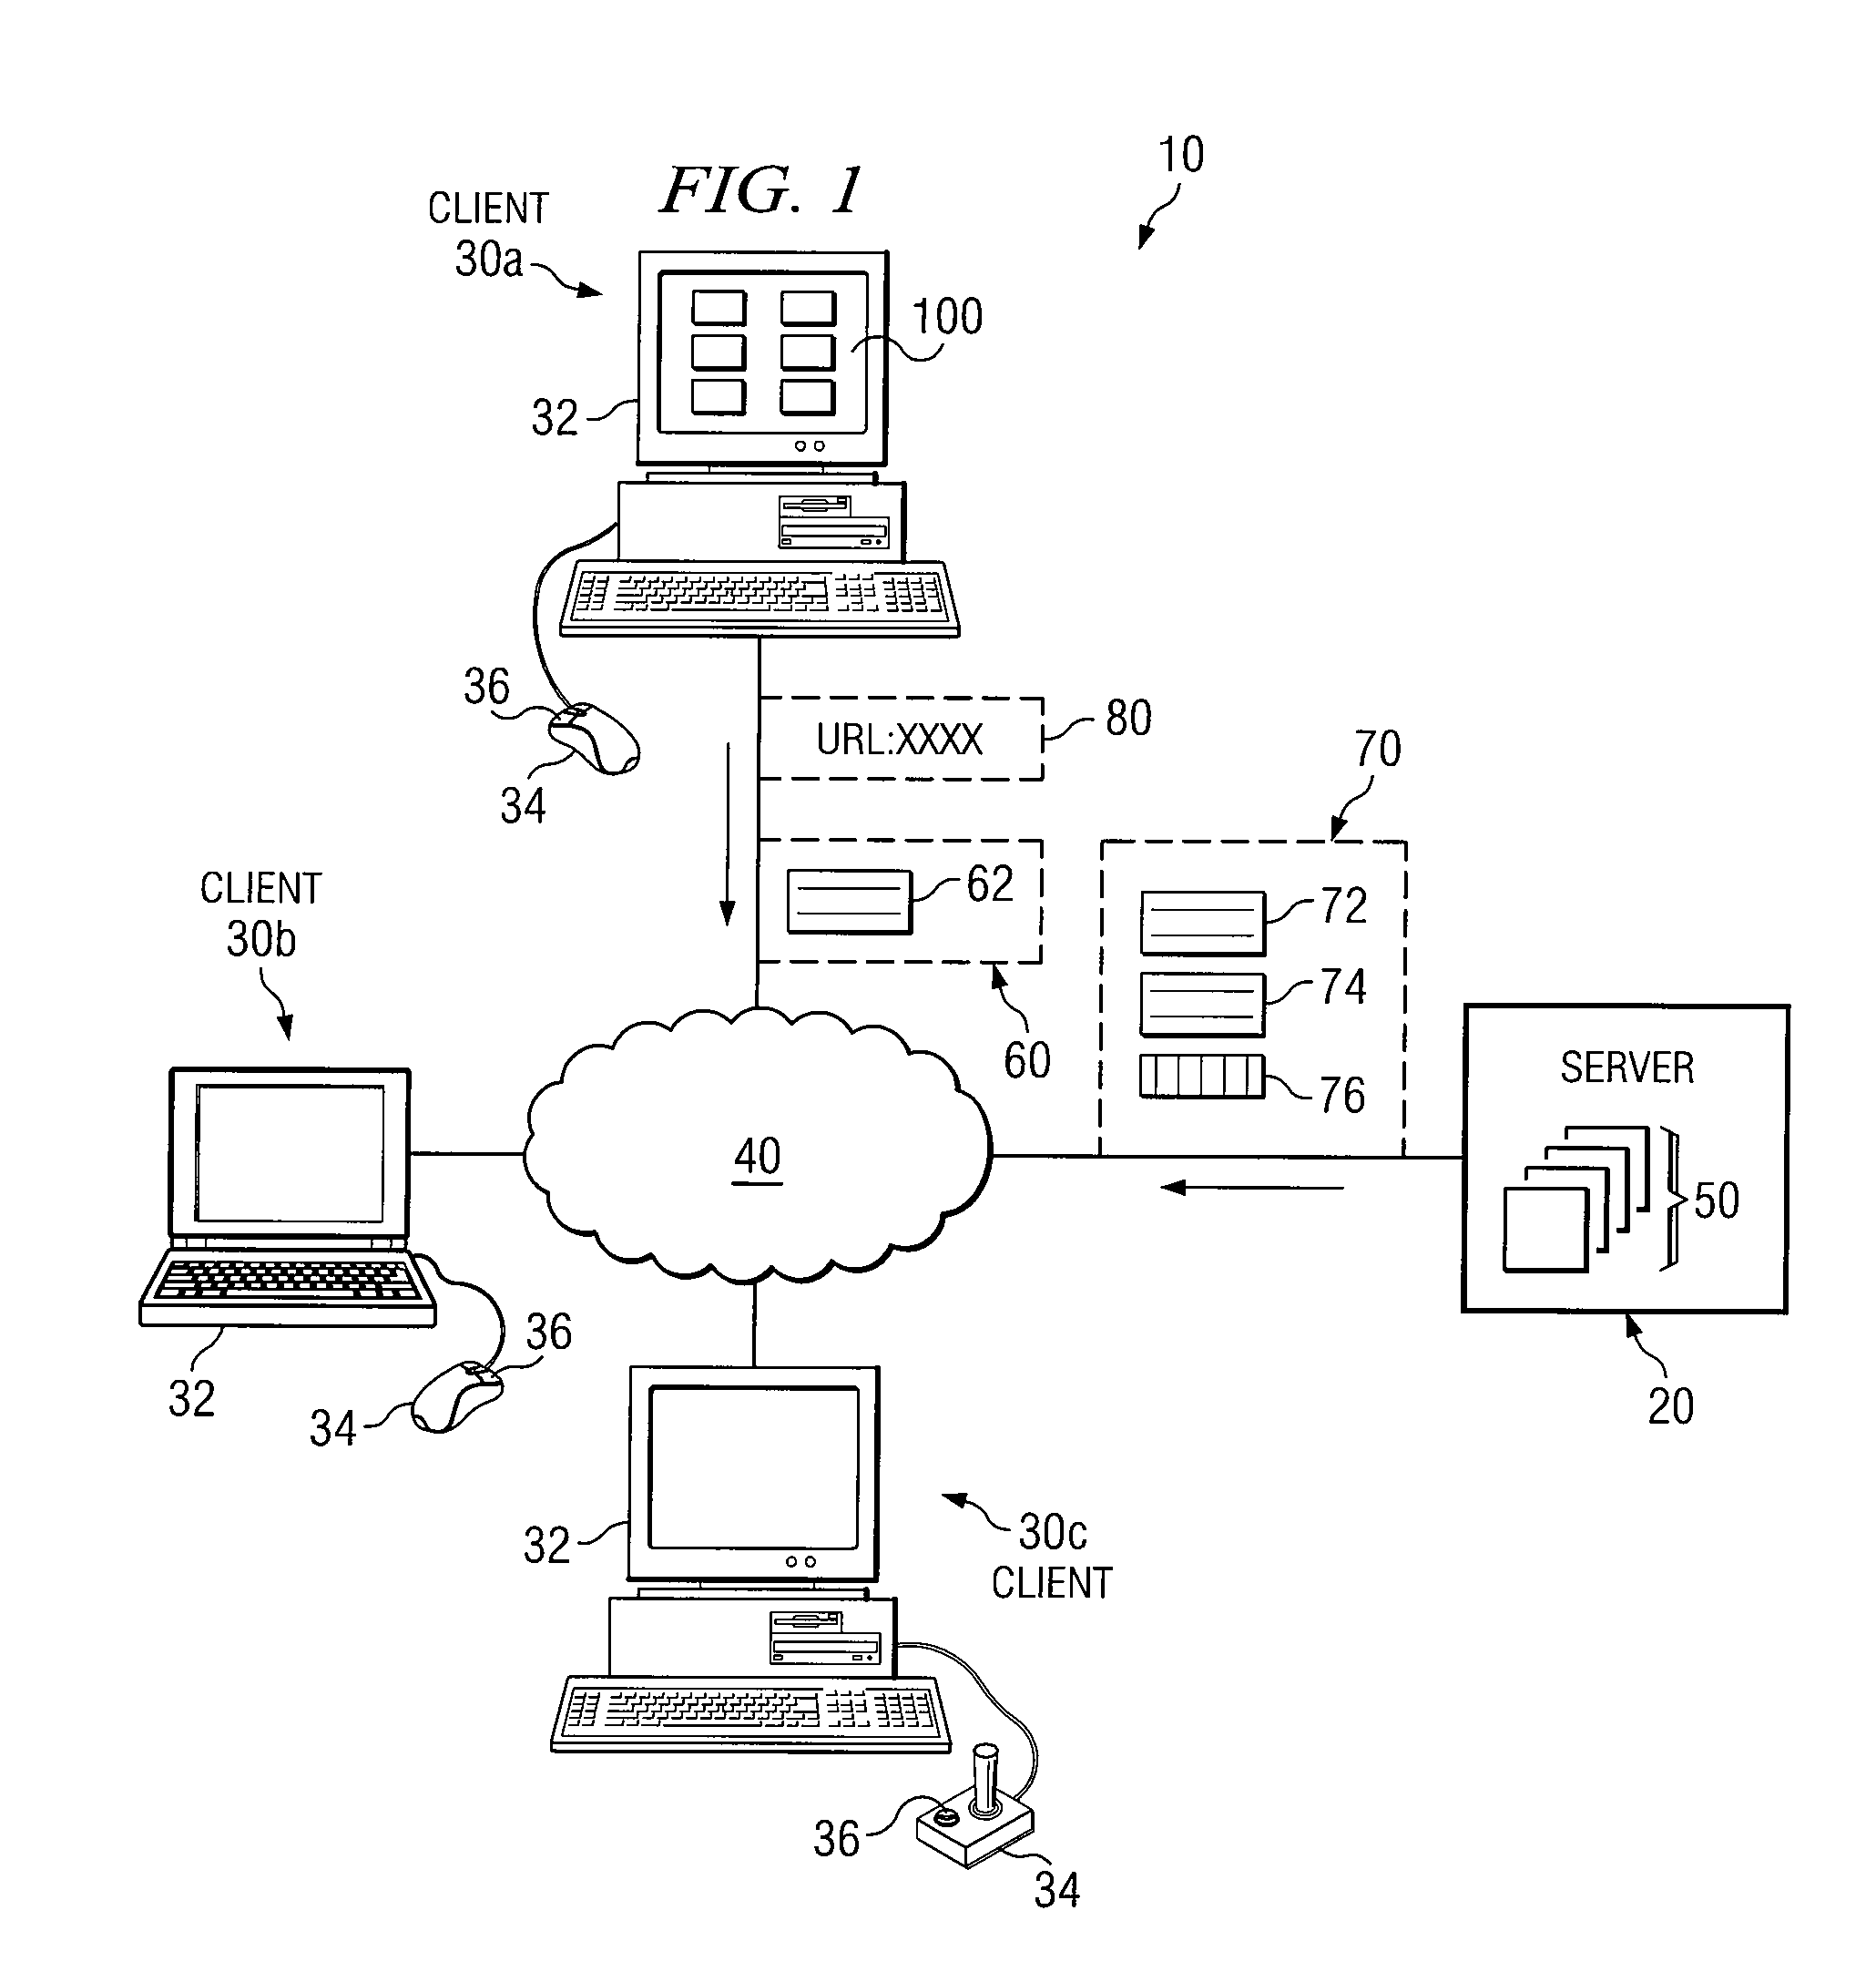 System and Method for Displaying Information